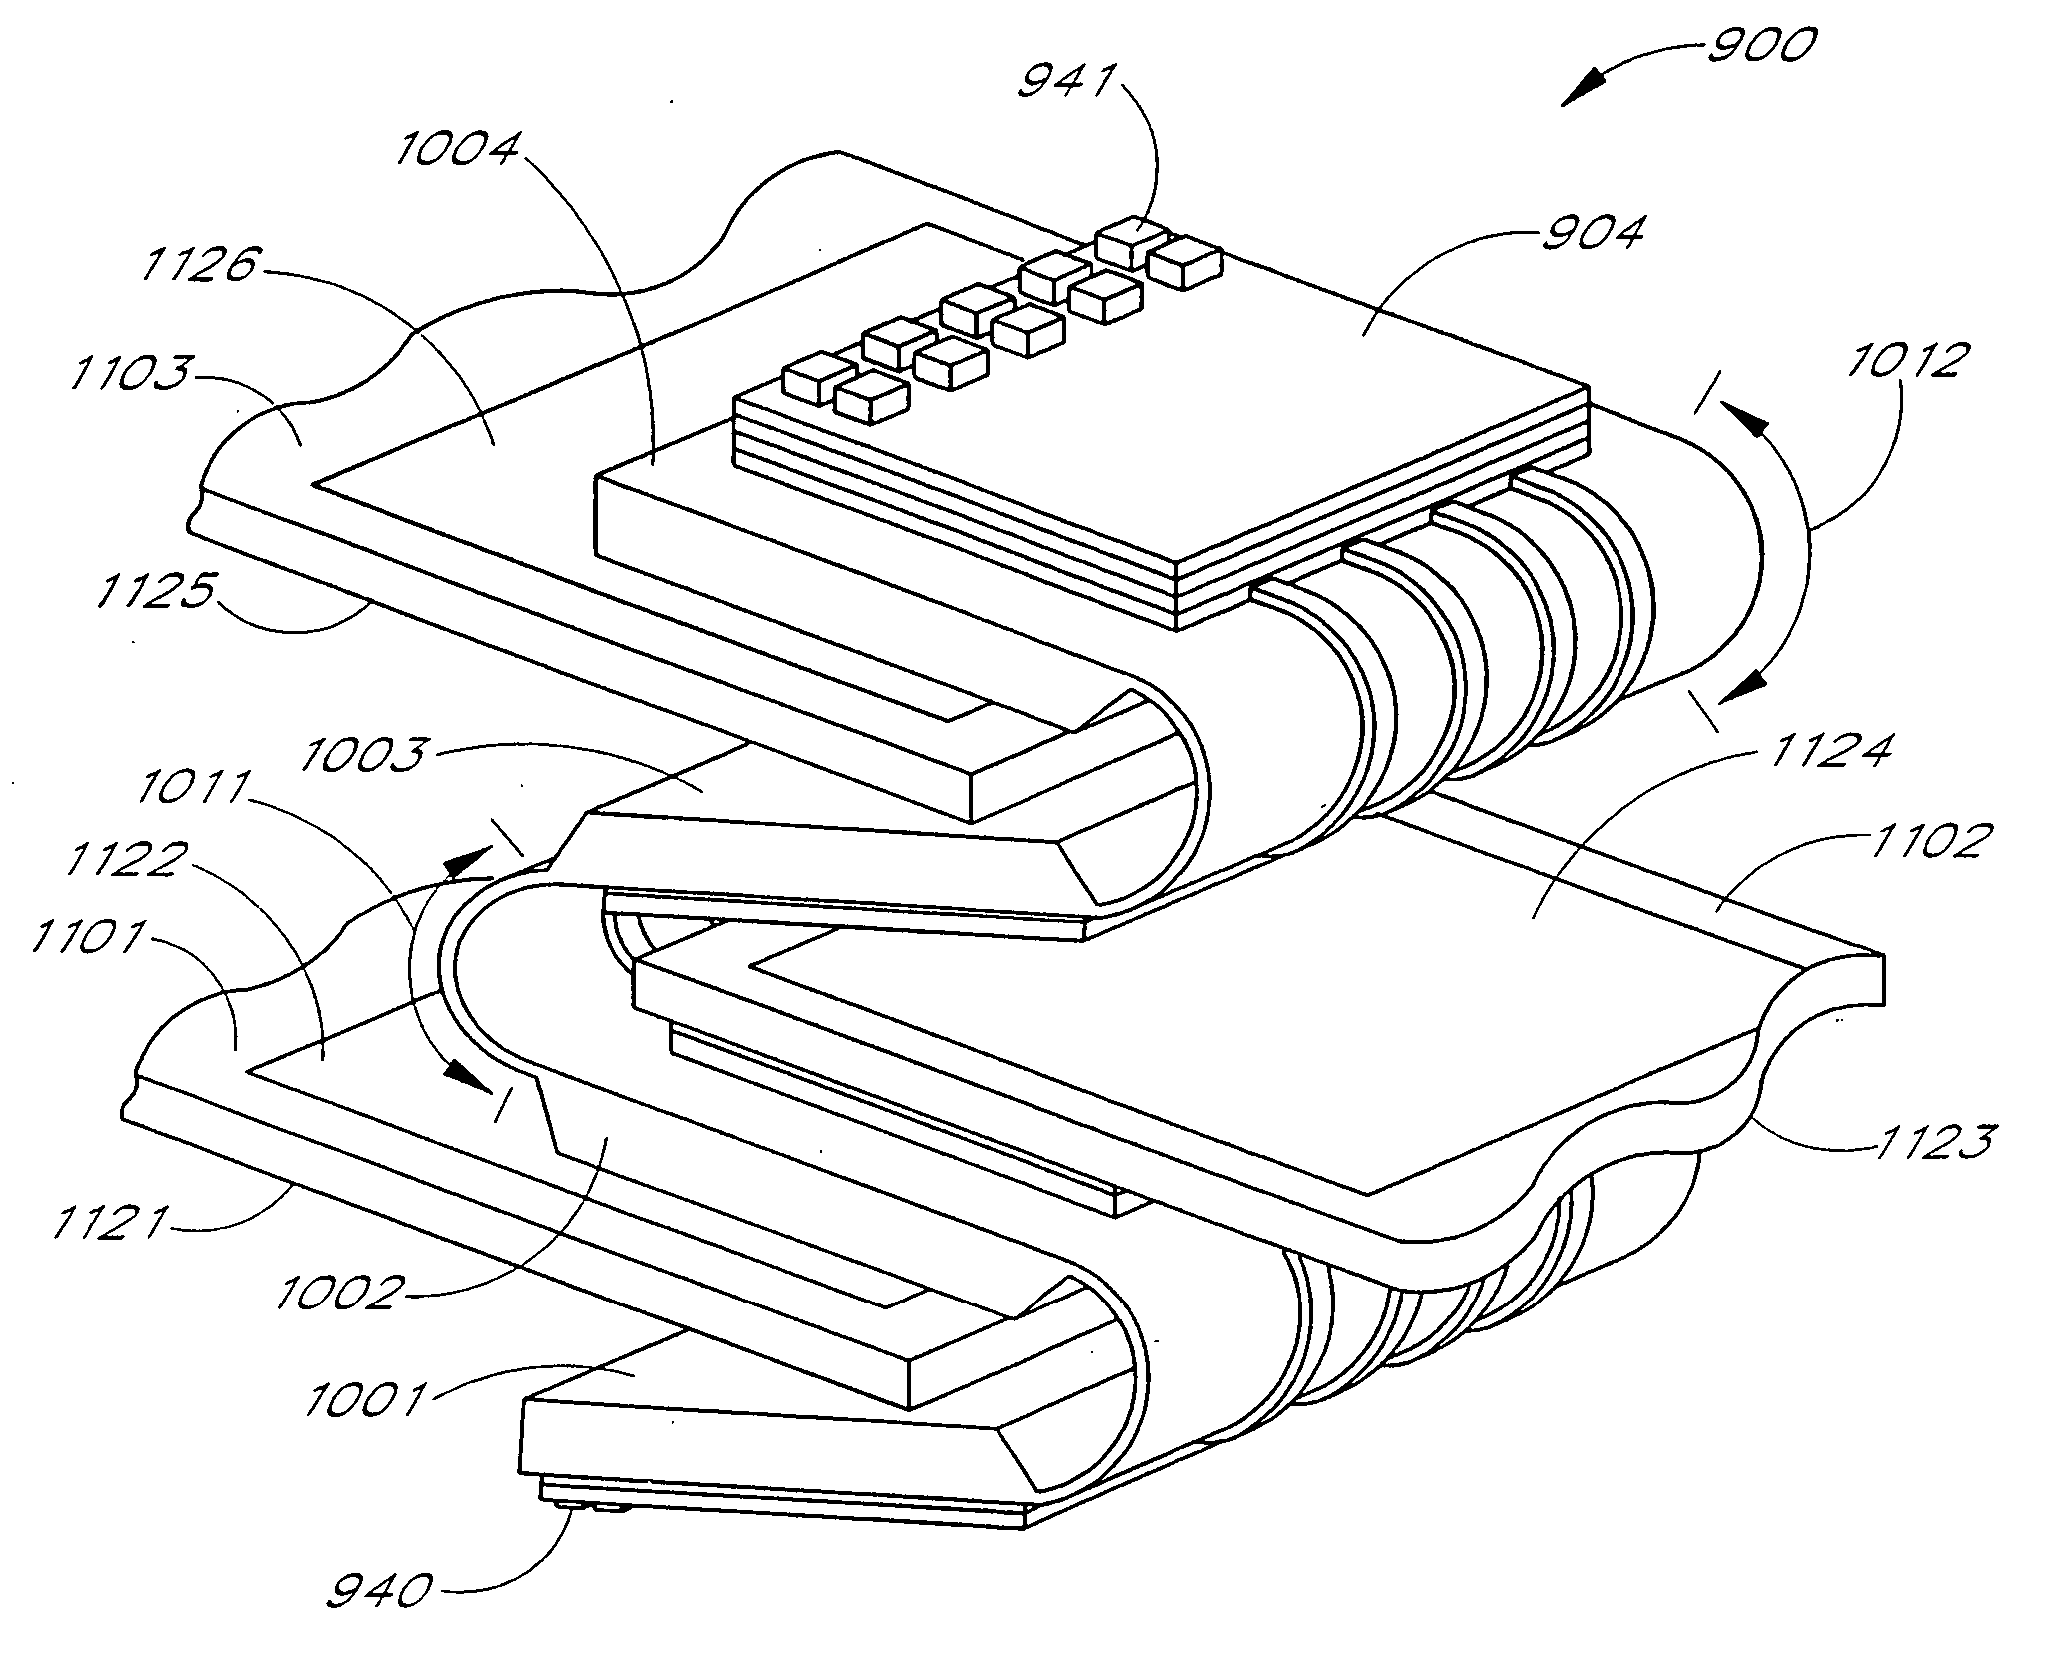 High-density packaging of integrated circuits